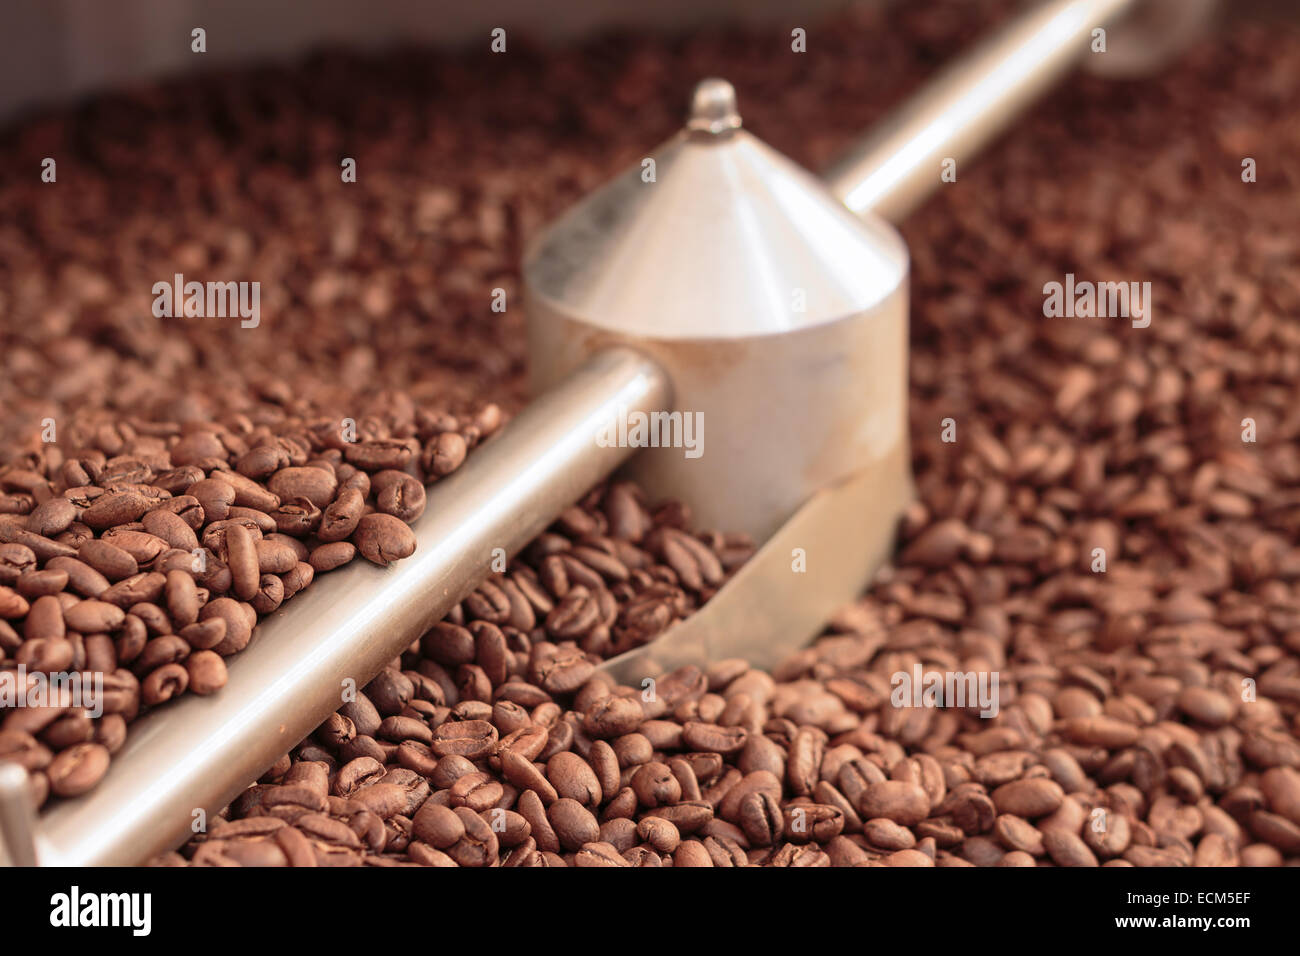 Coffee beans in a stainless steel cooler after roasting Stock Photo